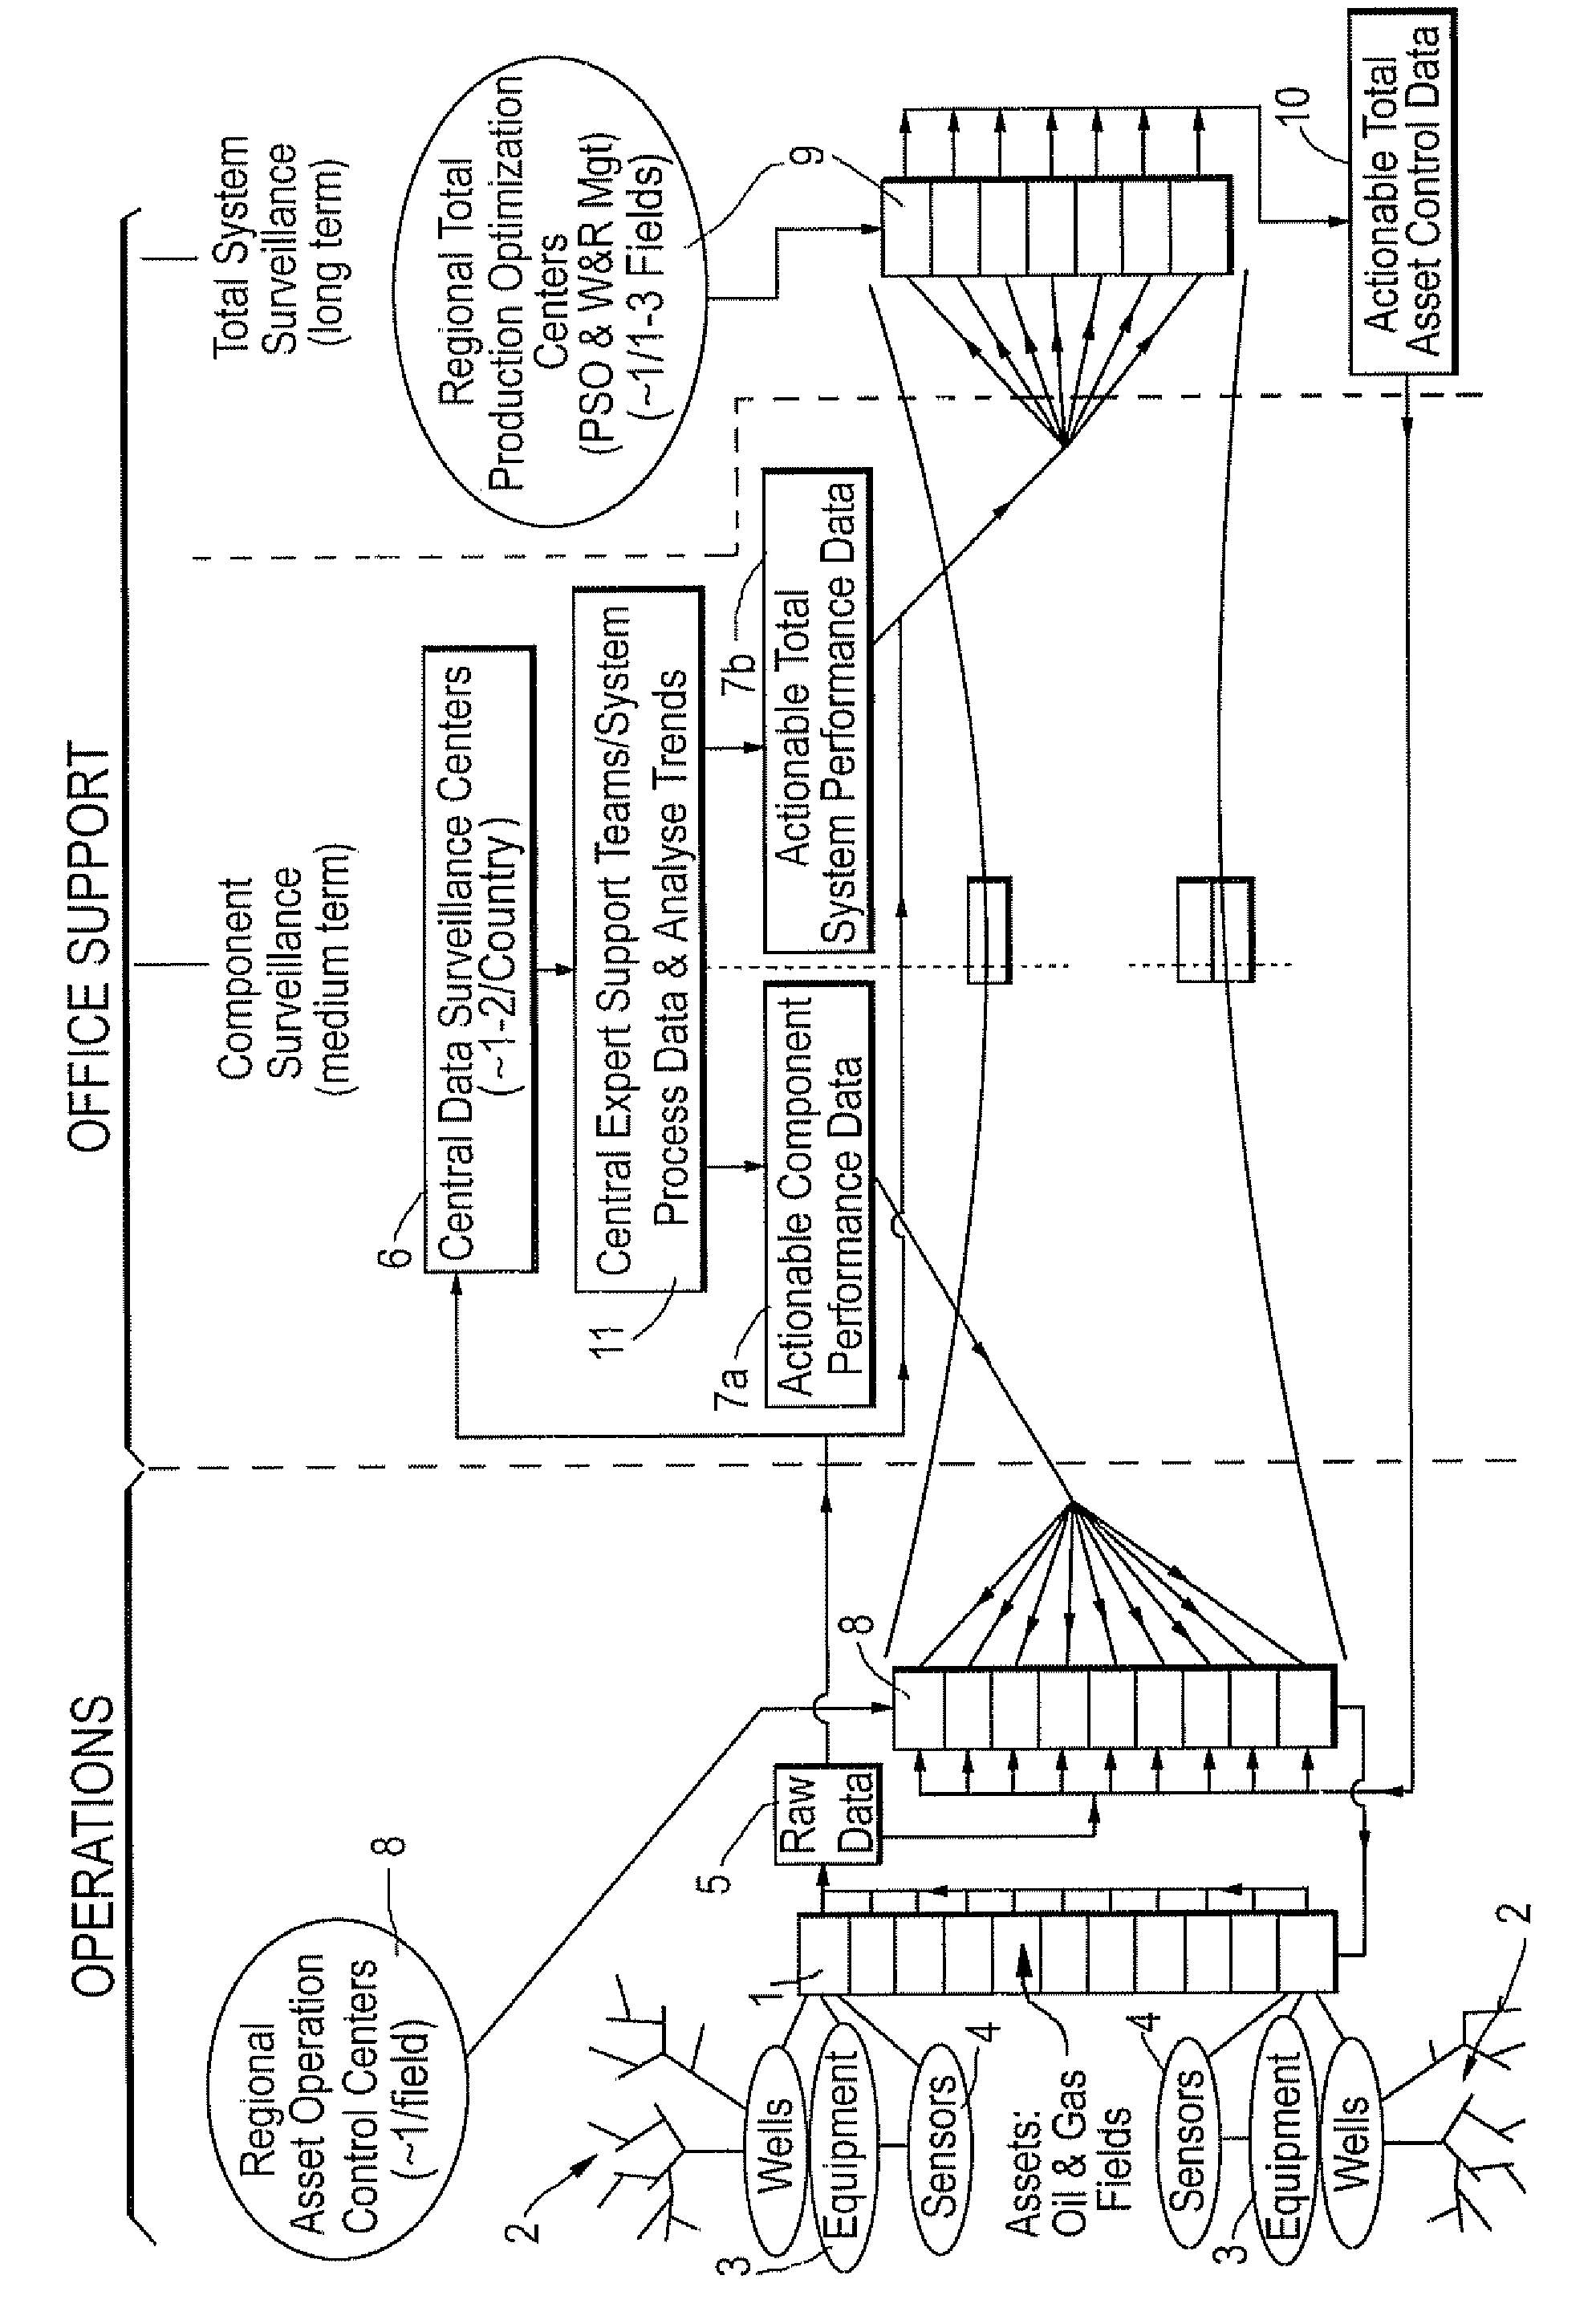 Method for controlling and/or optimizing production of oil and/or gas wells and facilities